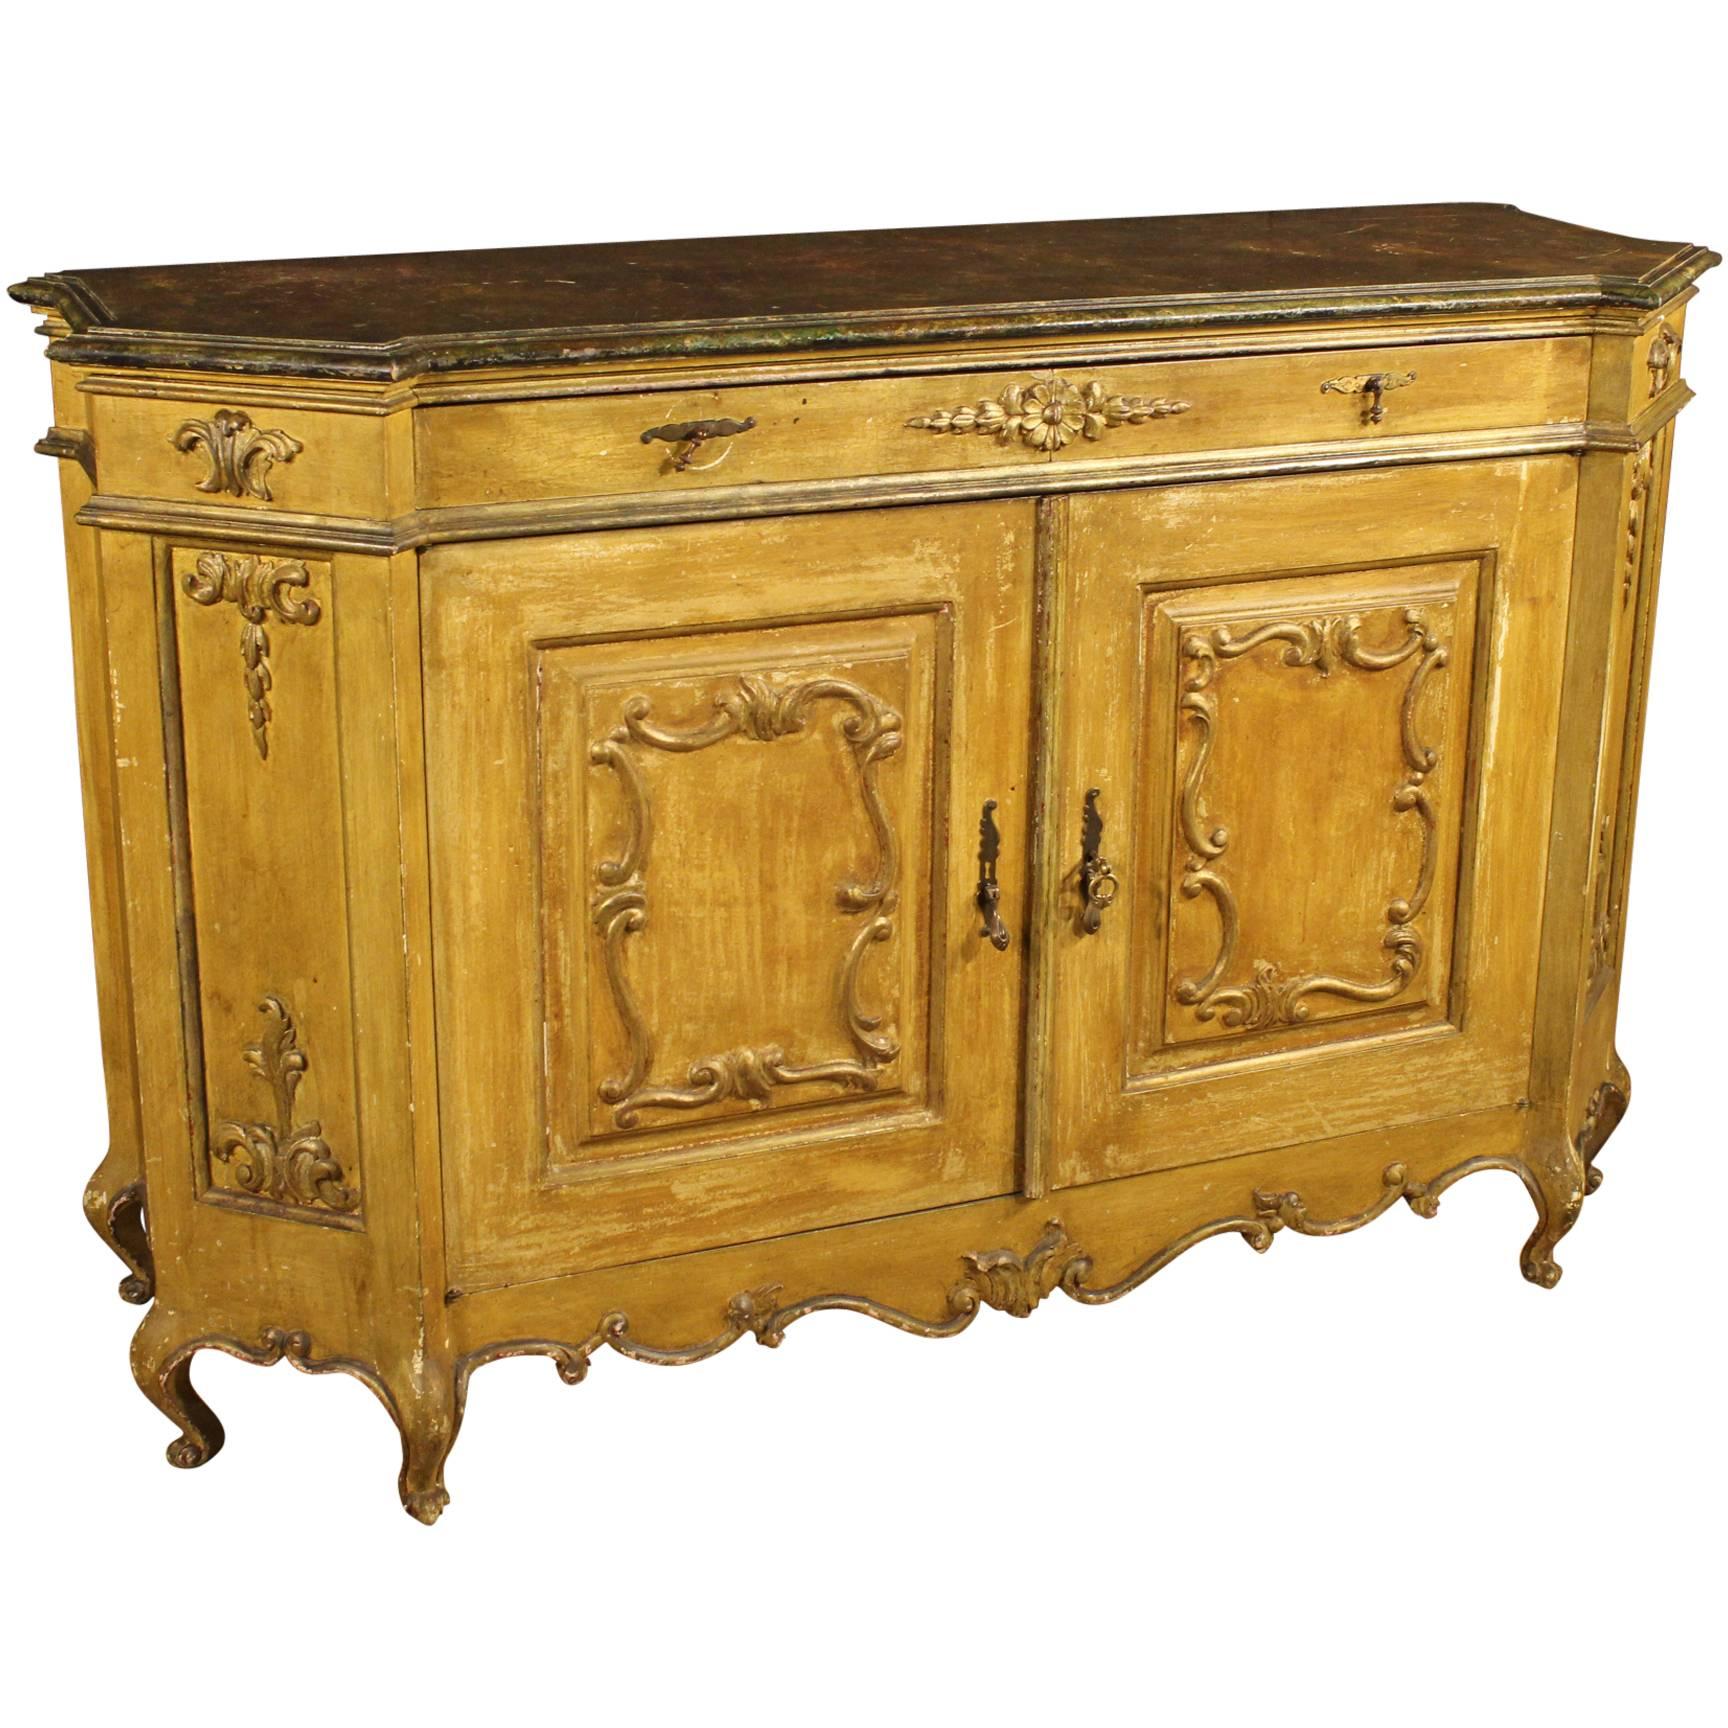 20th Century Venetian Lacquered and Gilded Sideboard